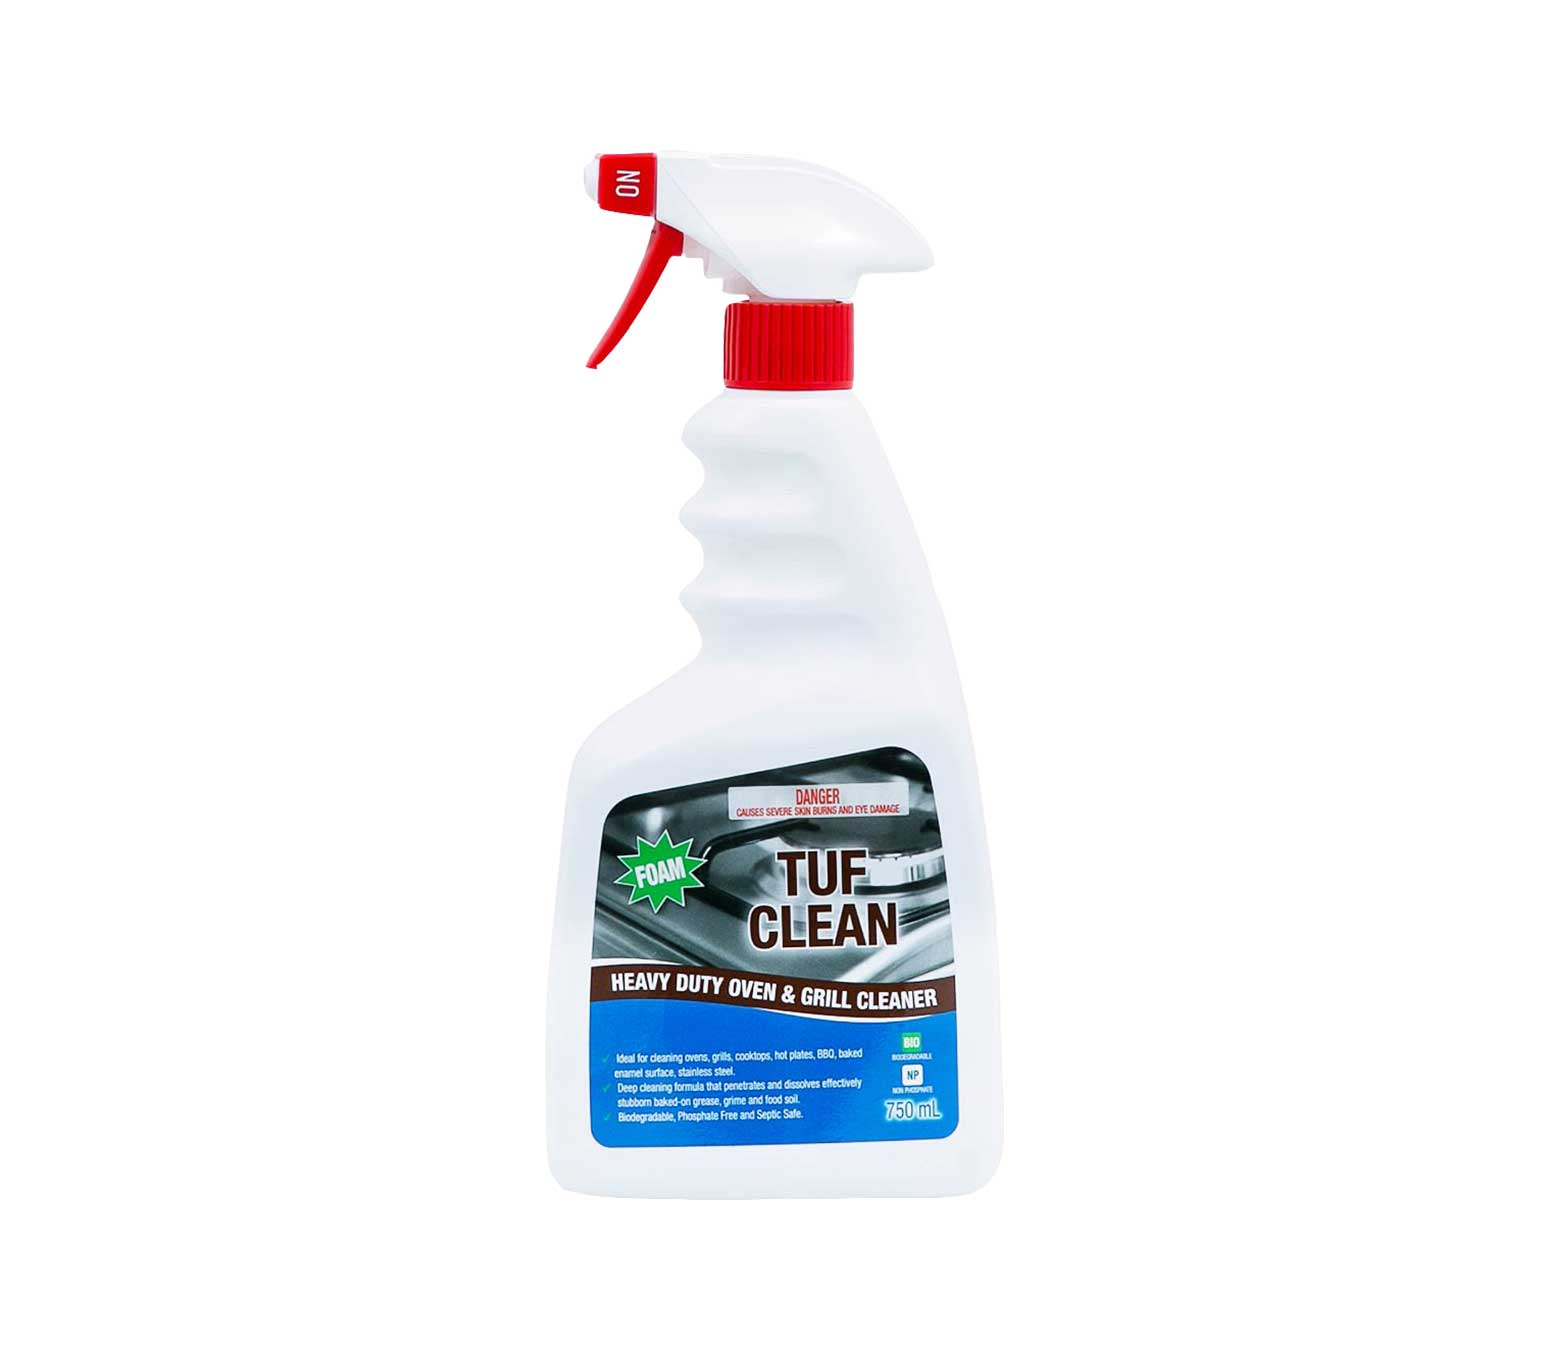 Tuf oven cleaner, too oven cleaner, oven bbq cleaner, heavy duty oven cleaner